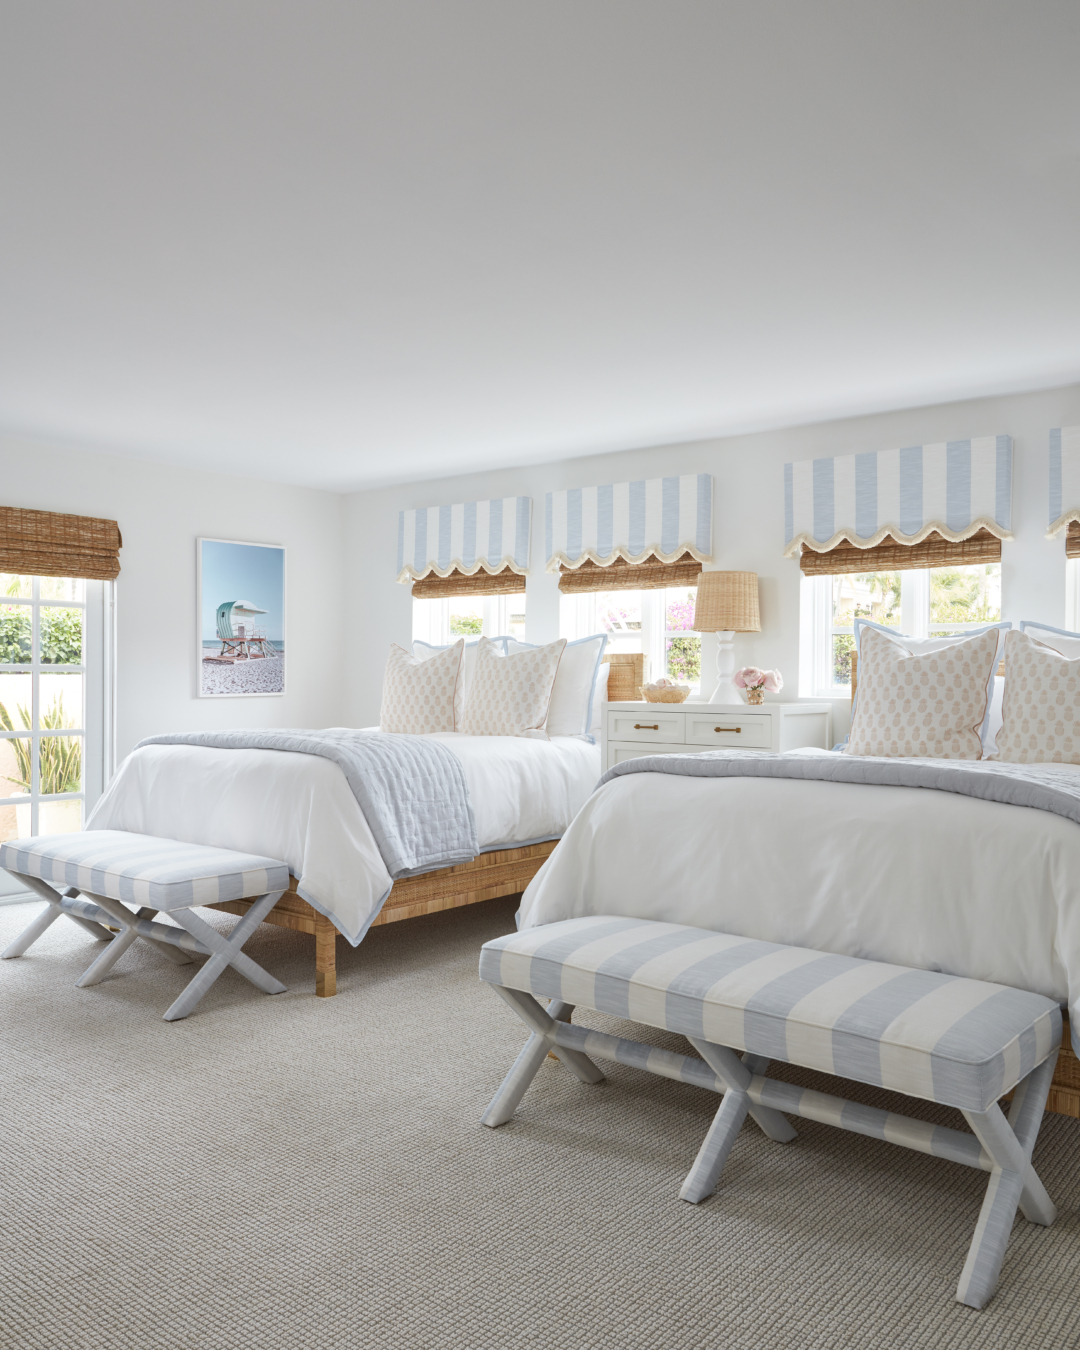 Travel Sisters Suite Master Bedroom, Serena And Lily Bunk Beds